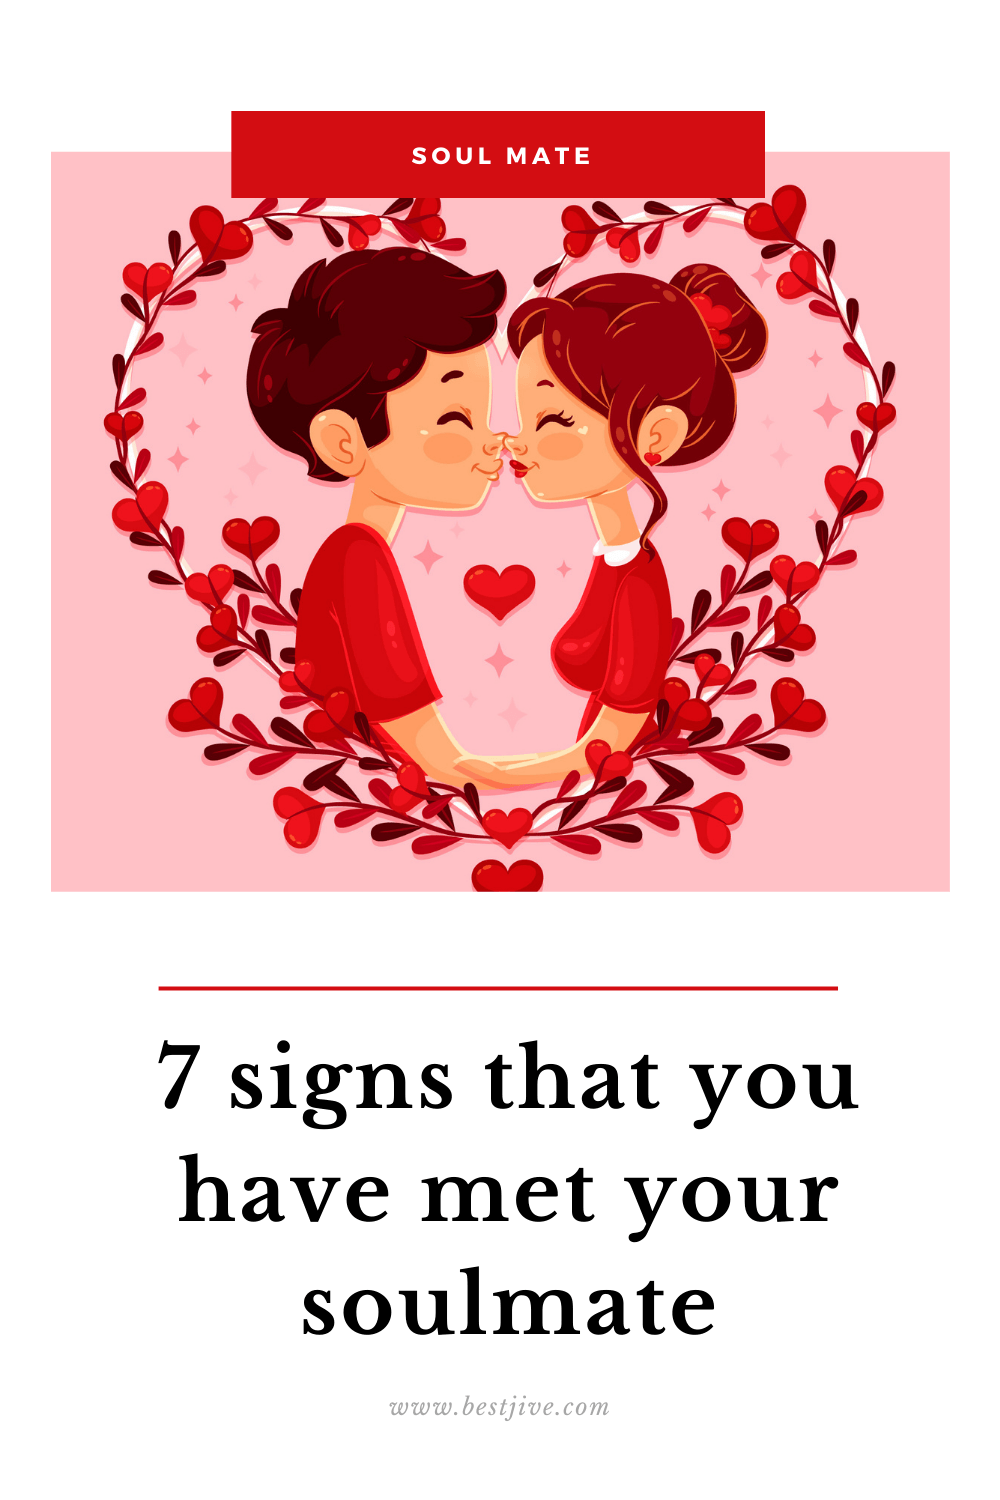 Soulmate found signs you have that your What's a